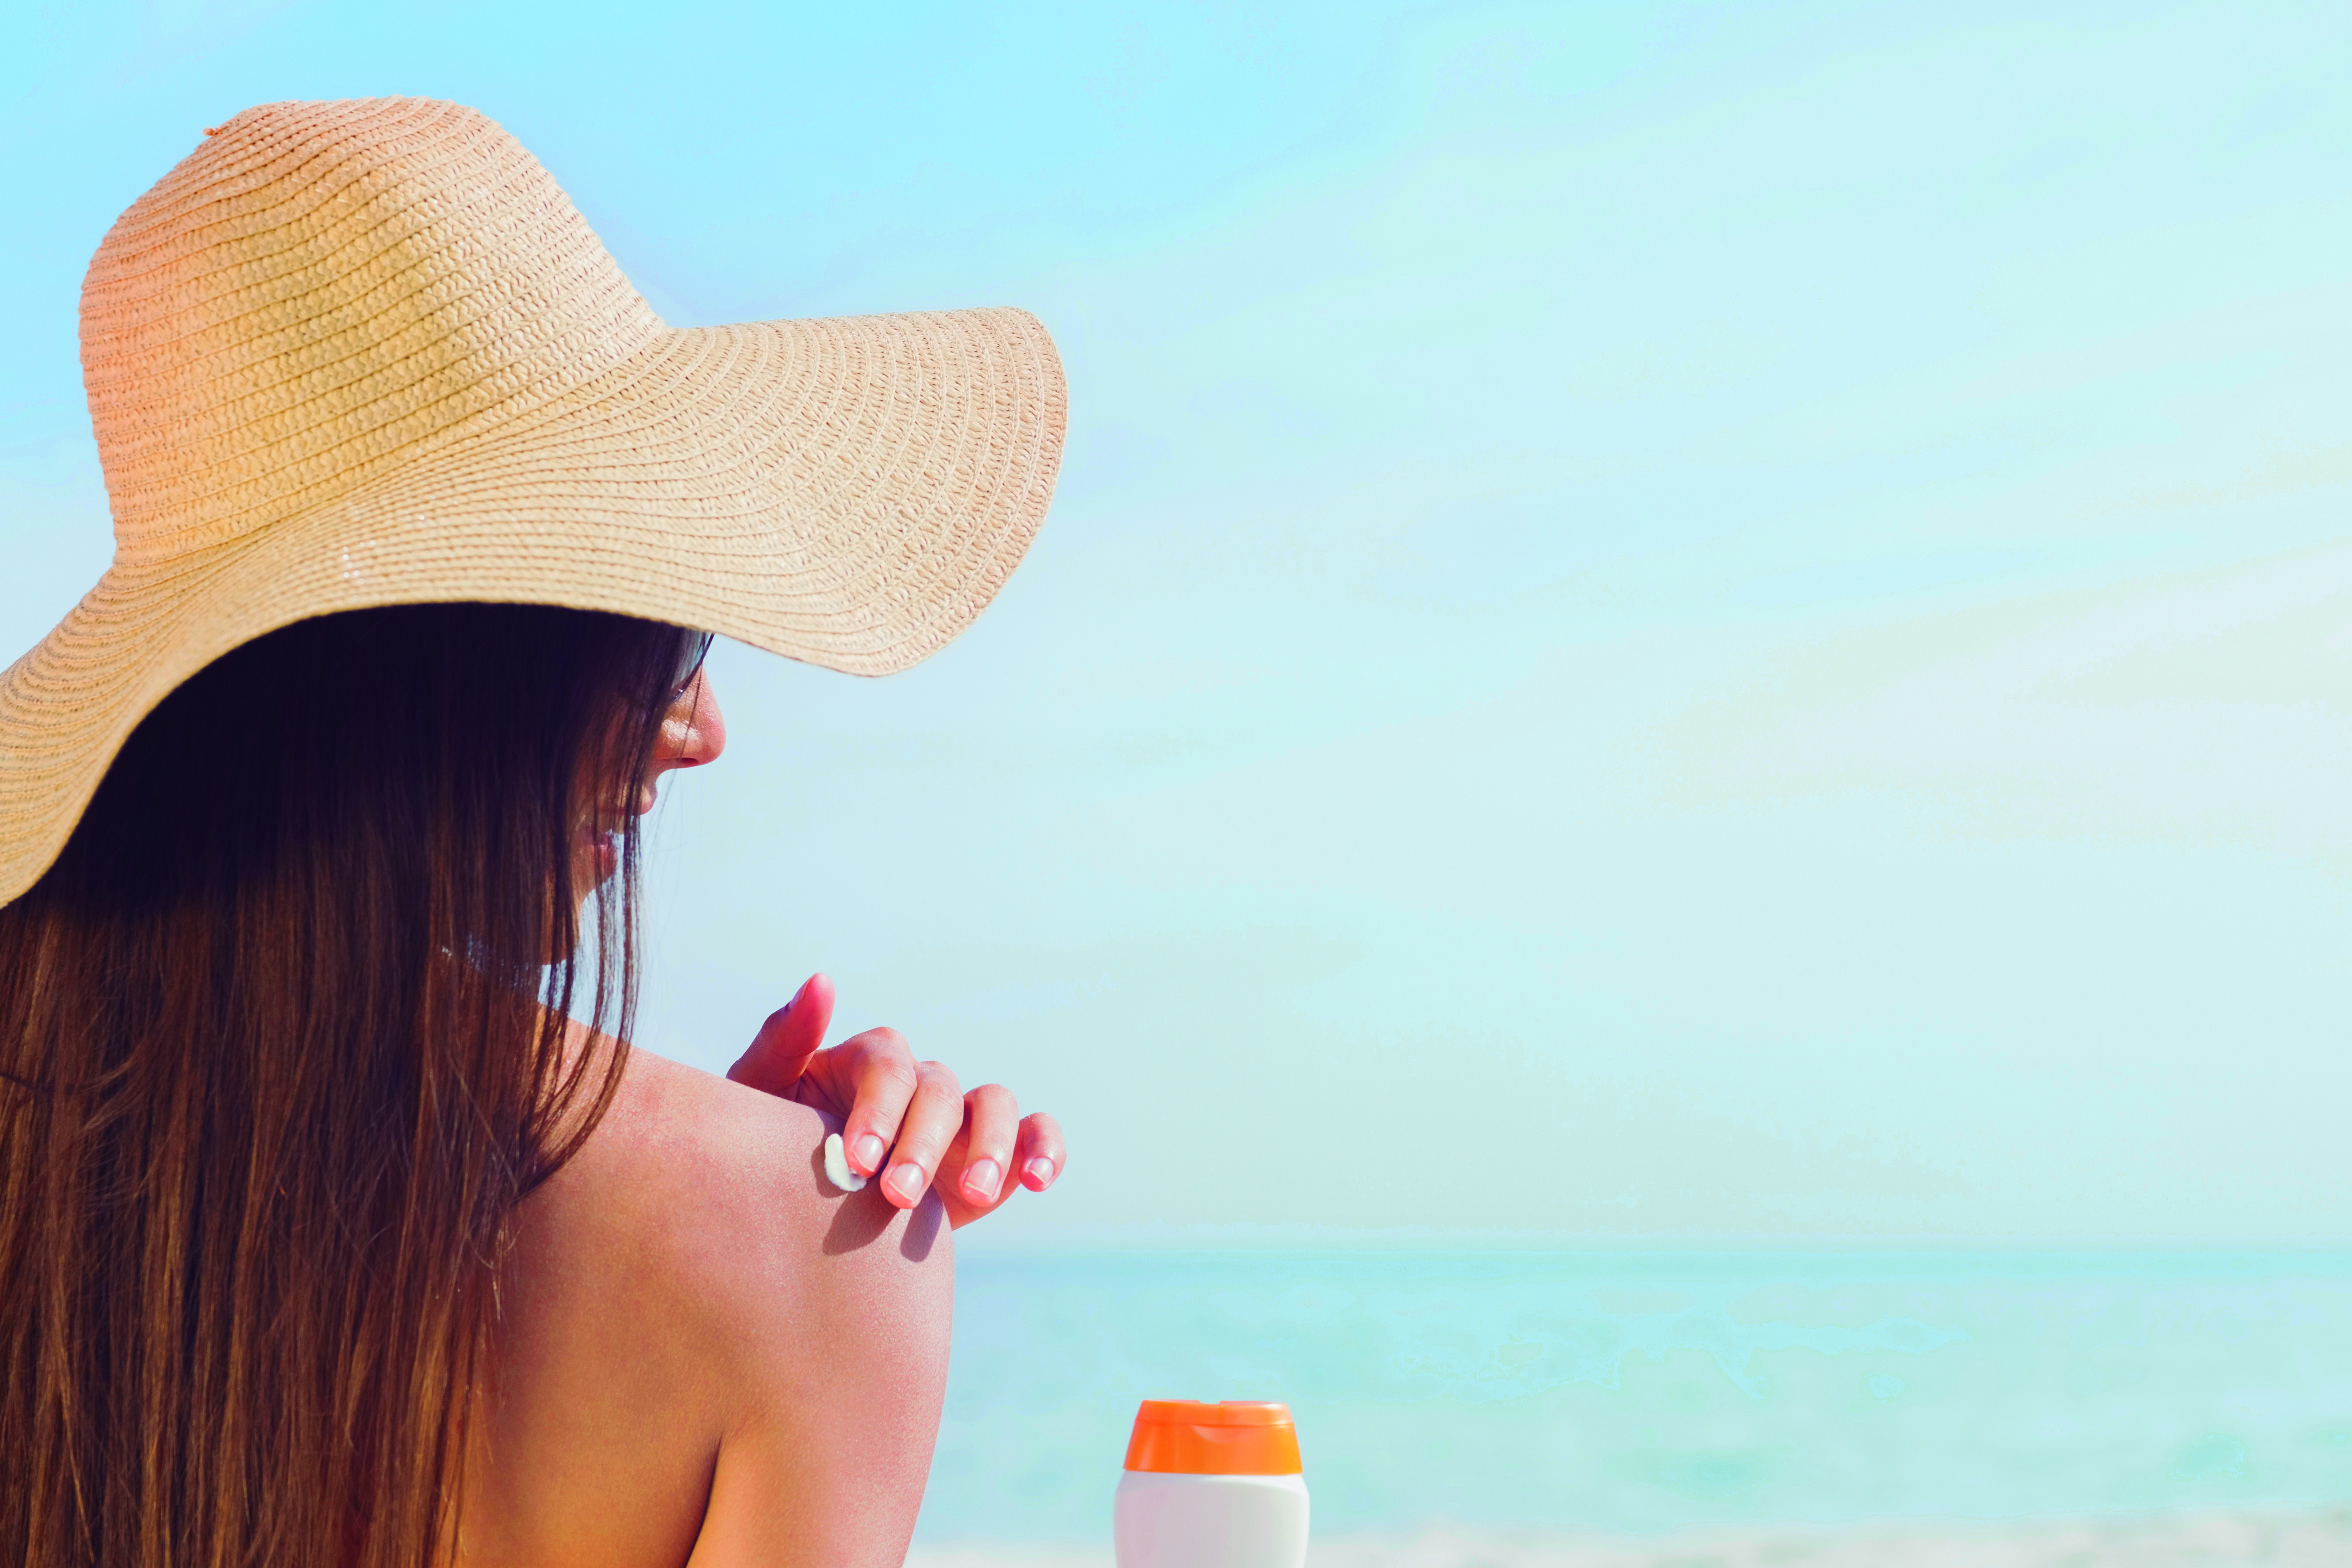 Brunette putting sunscreen on her shoulder, 20s, Straw hat, Relaxing, Scenic, HQ Photo